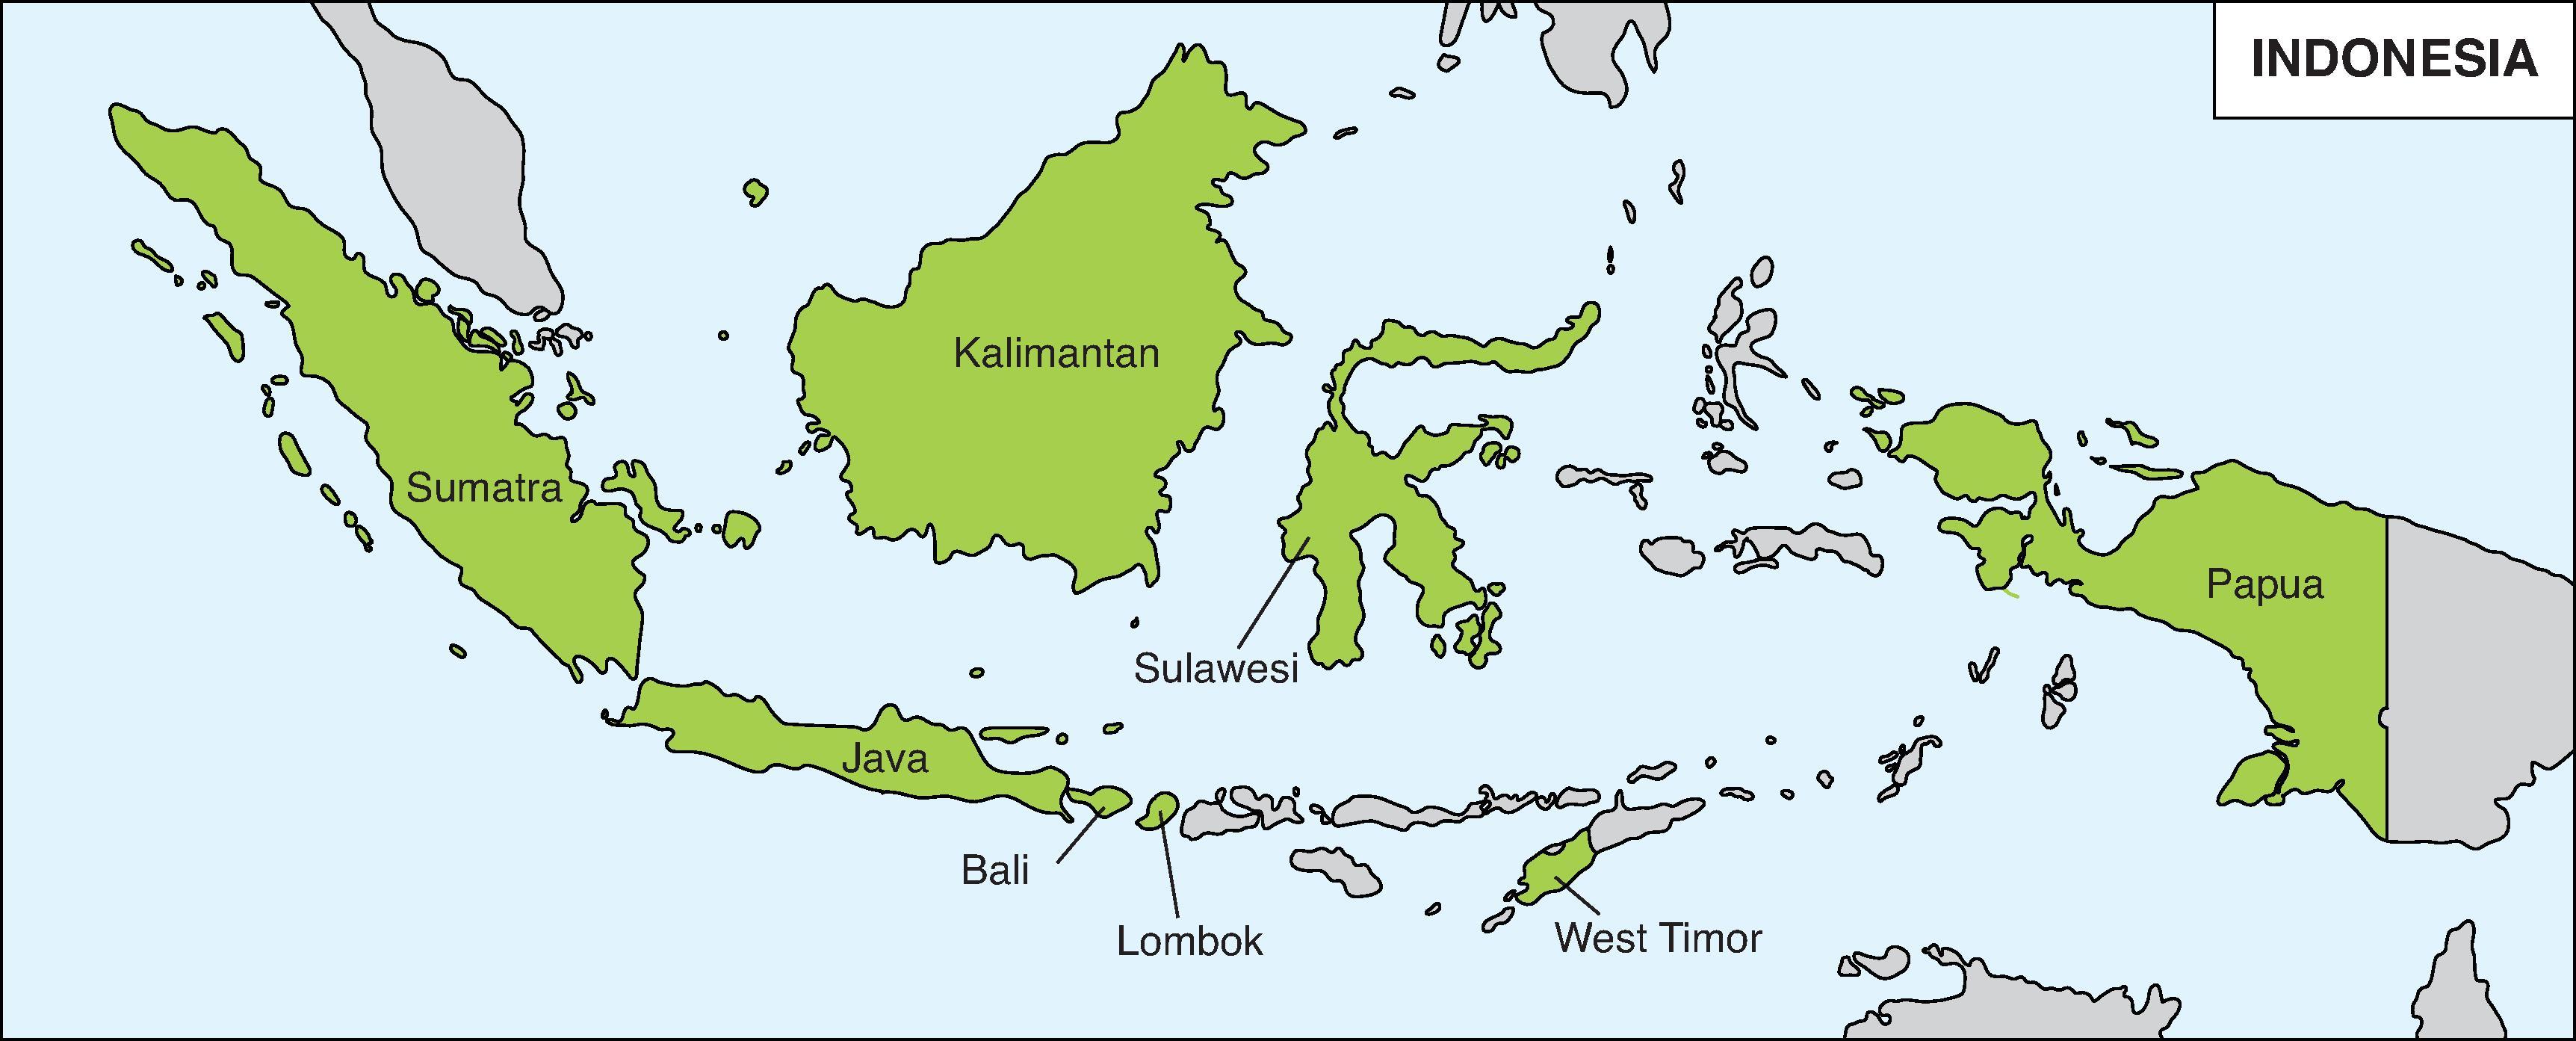 Fig. 35.9, Map of Indonesia showing islands where serologically confirmed JE cases have been reported.